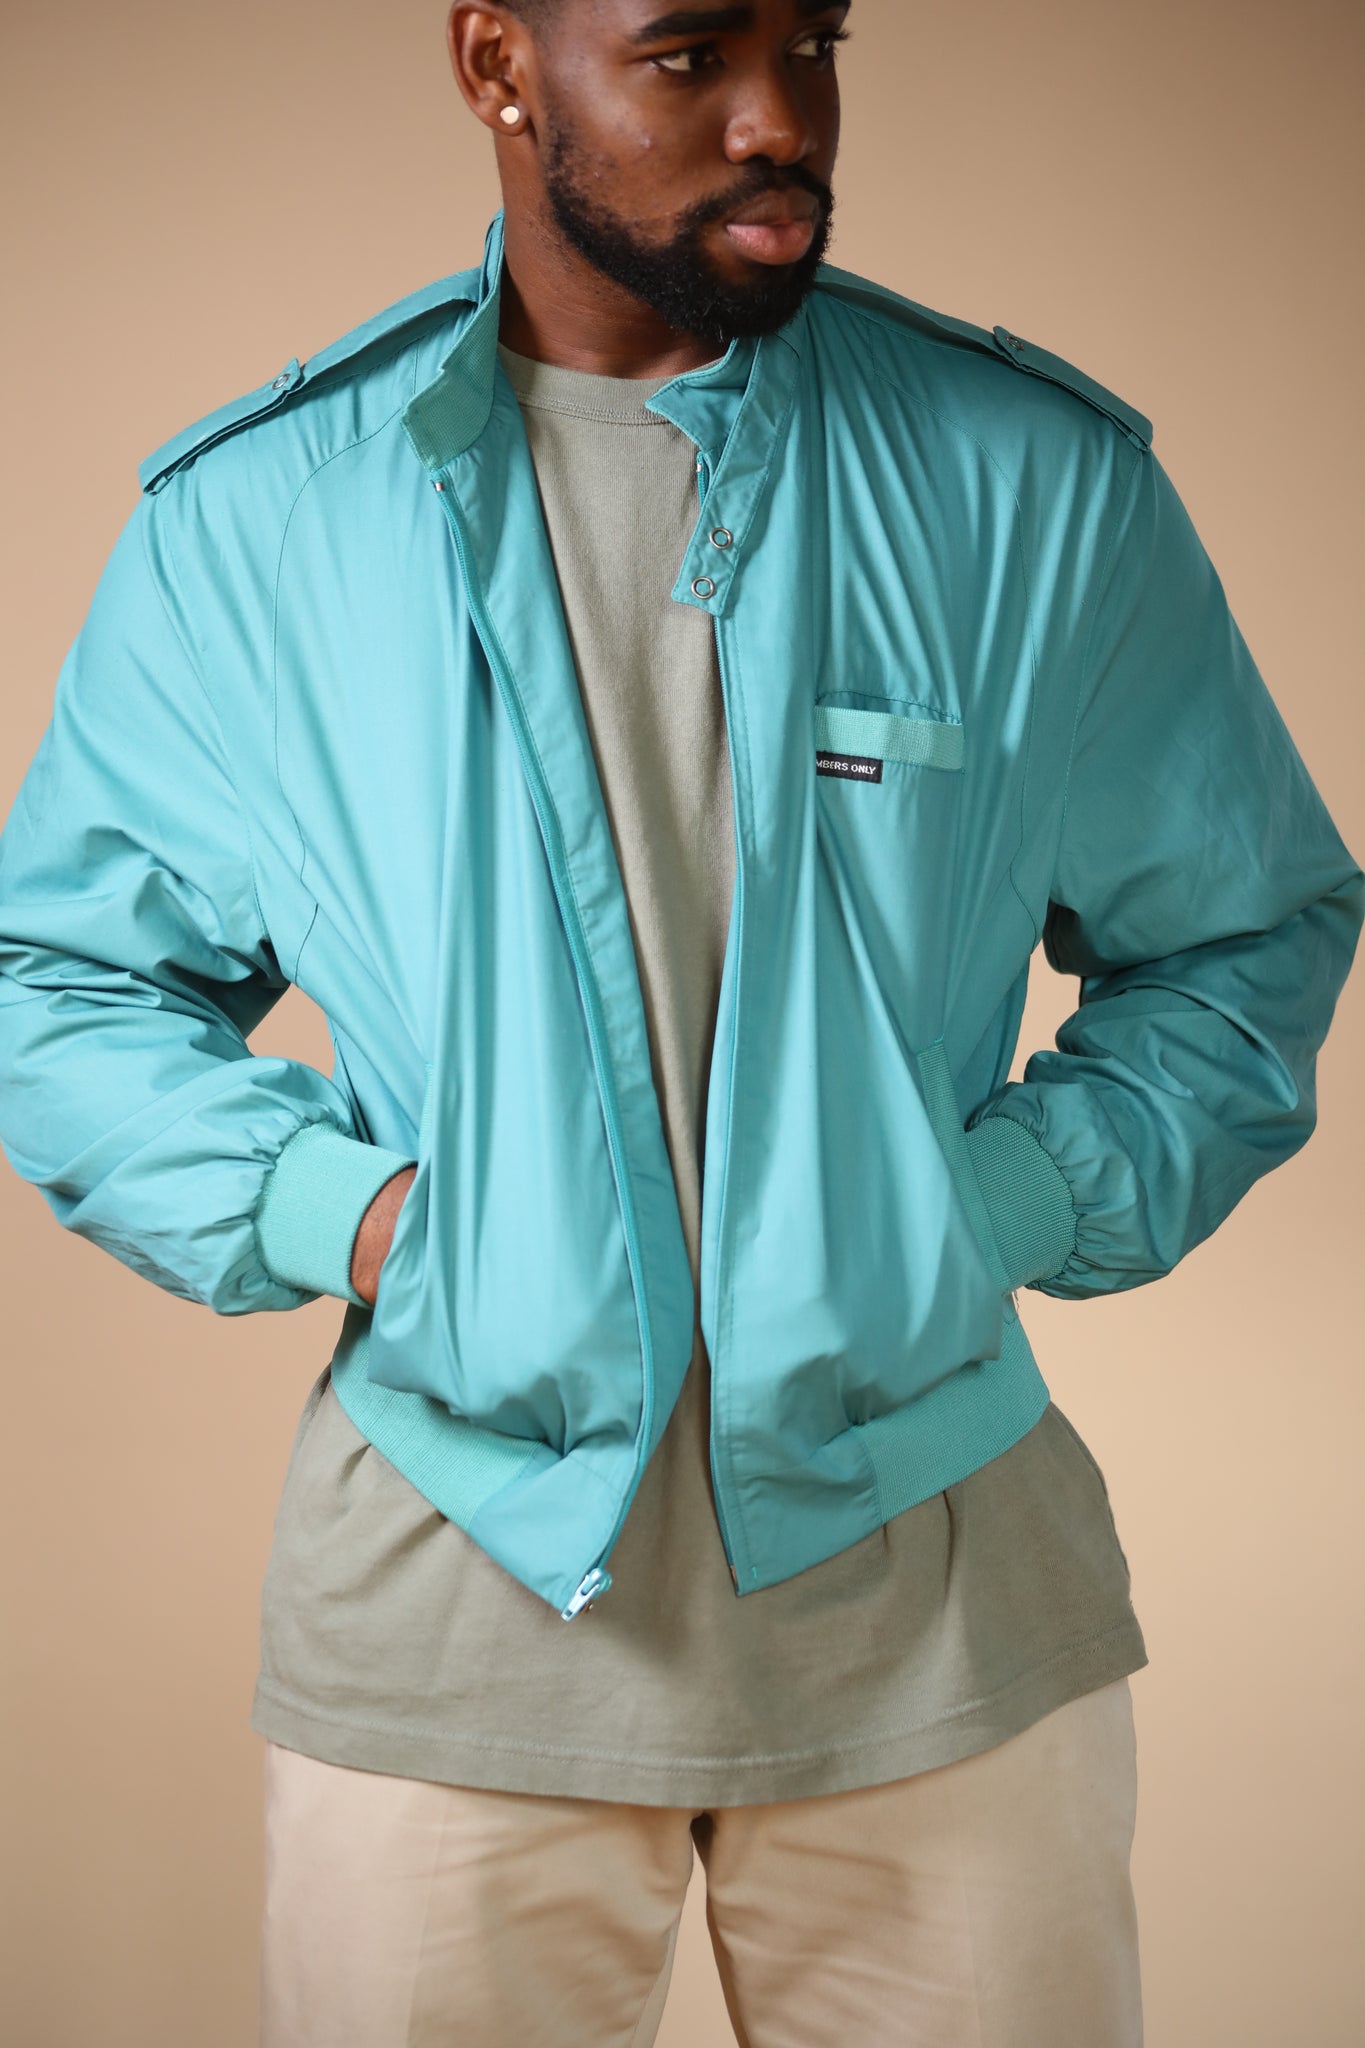 Members Only Jackets – KB In Your Closet